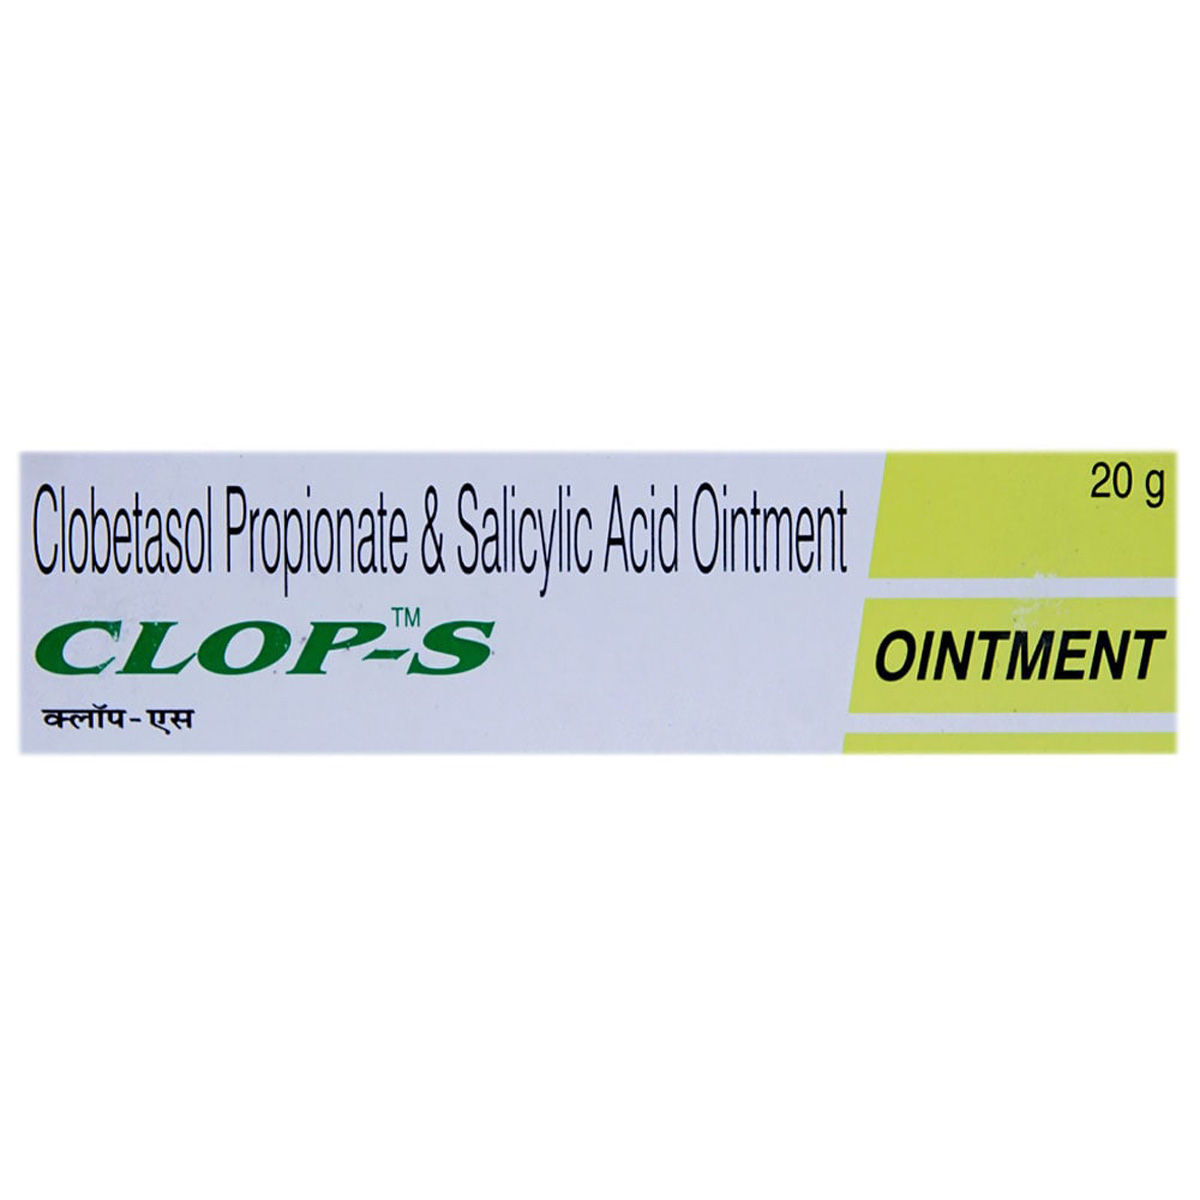 Clop-S Ointment 20 gm Price, Uses, Side Effects, Composition ...